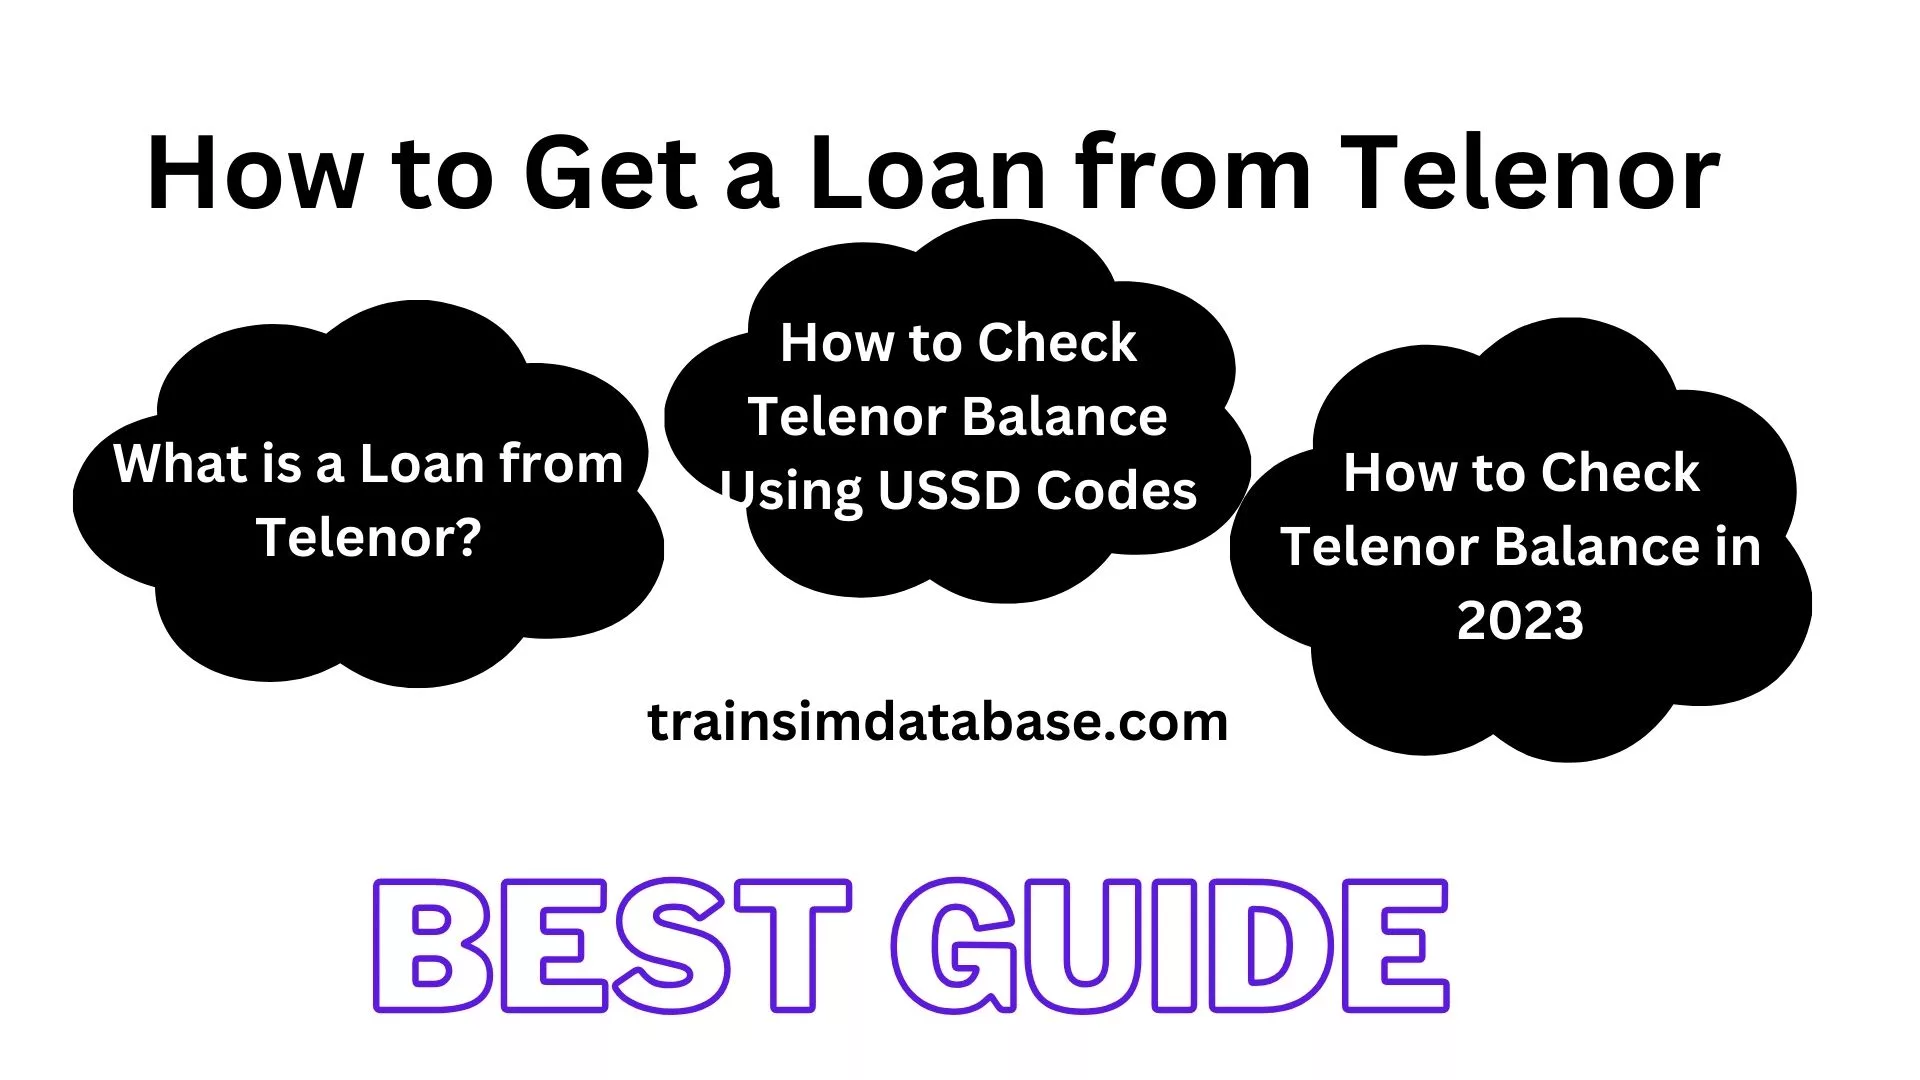 How to Get a Loan from Telenor